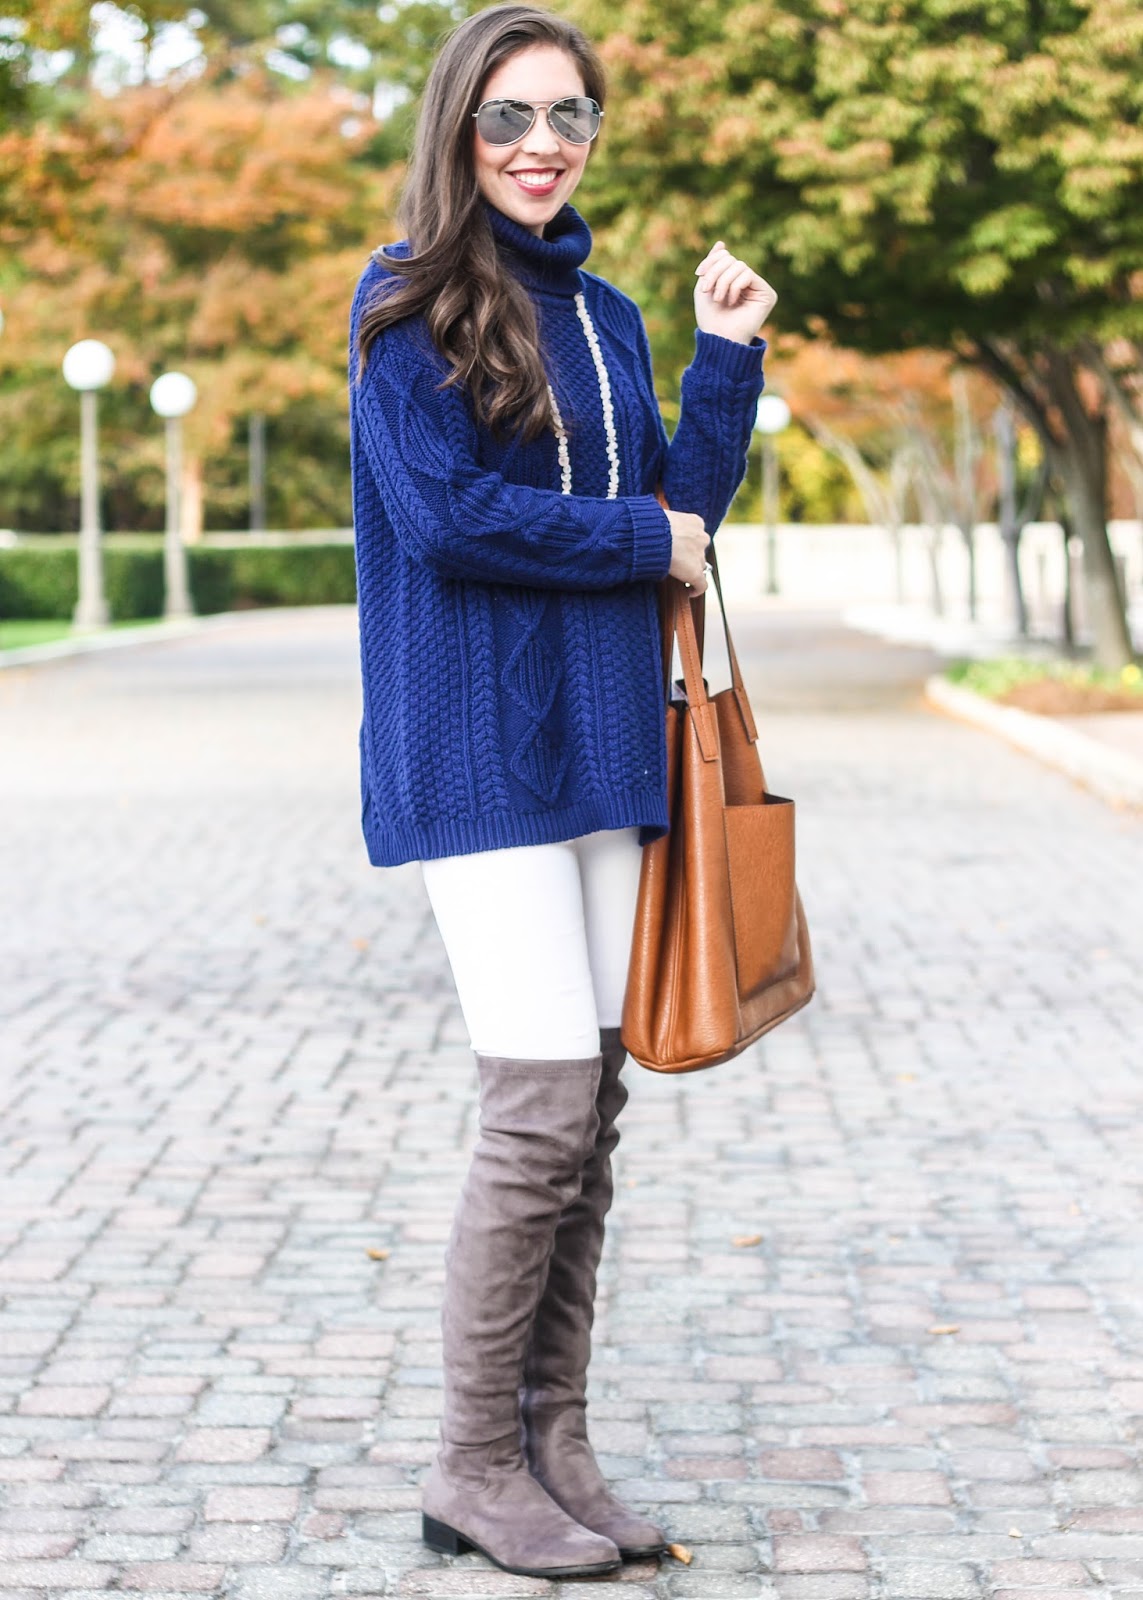 Sweater of the Season - Pretty in the Pines, New York City Lifestyle Blog